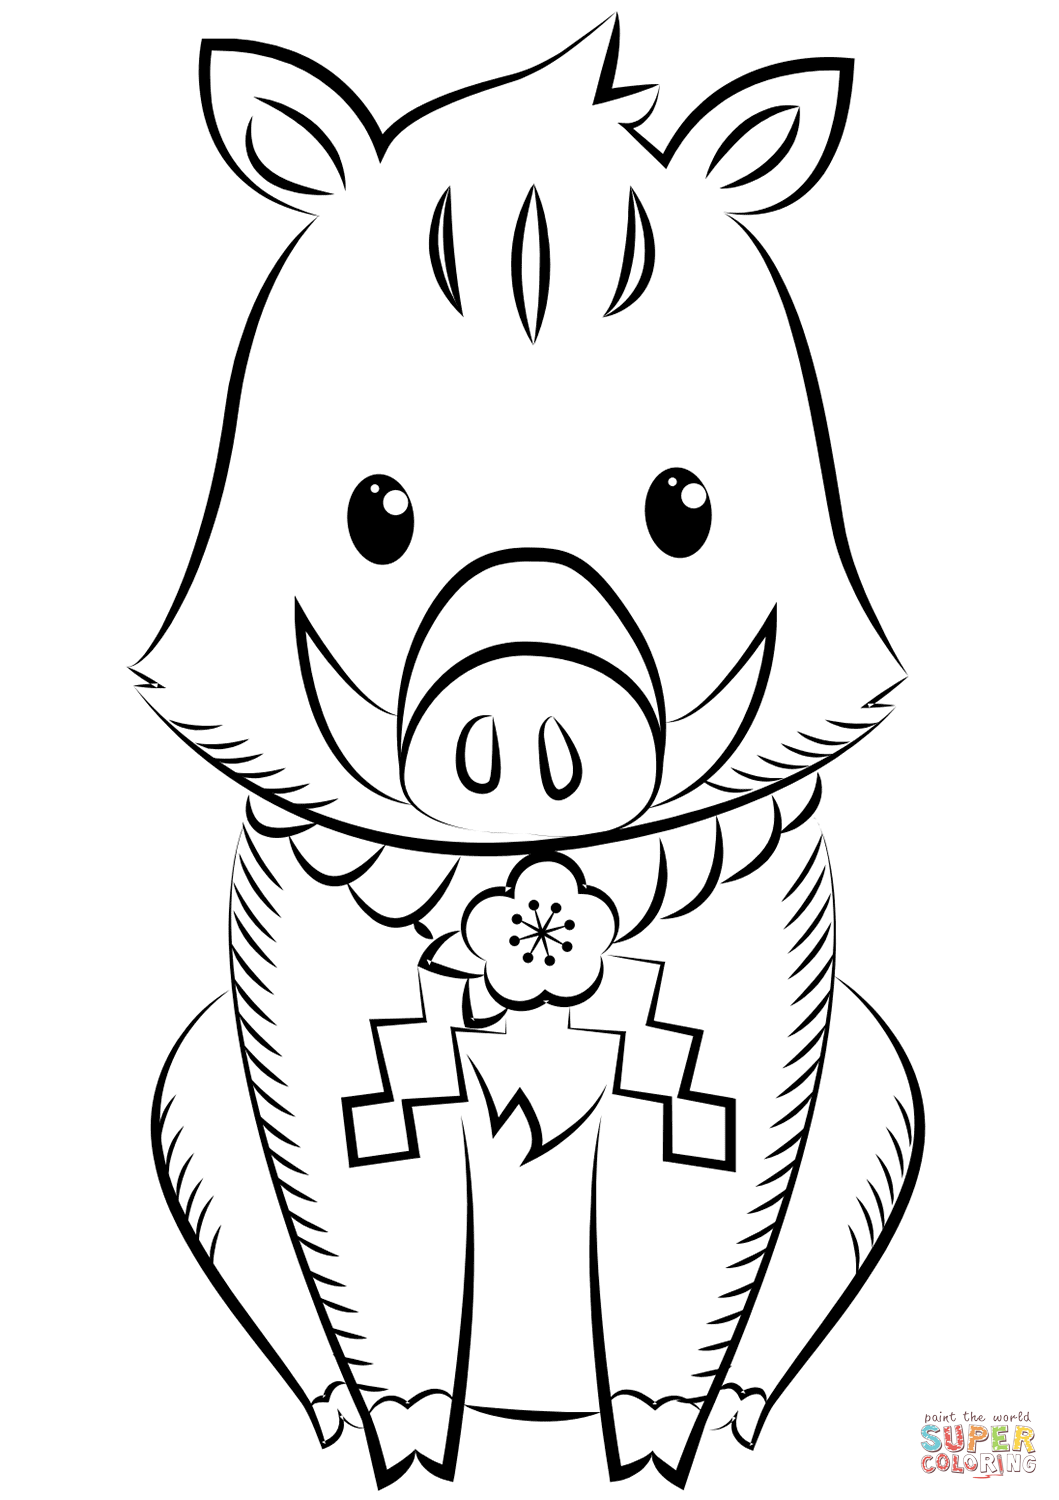 2019 Wild Boar coloring page | Free Printable Coloring Pages